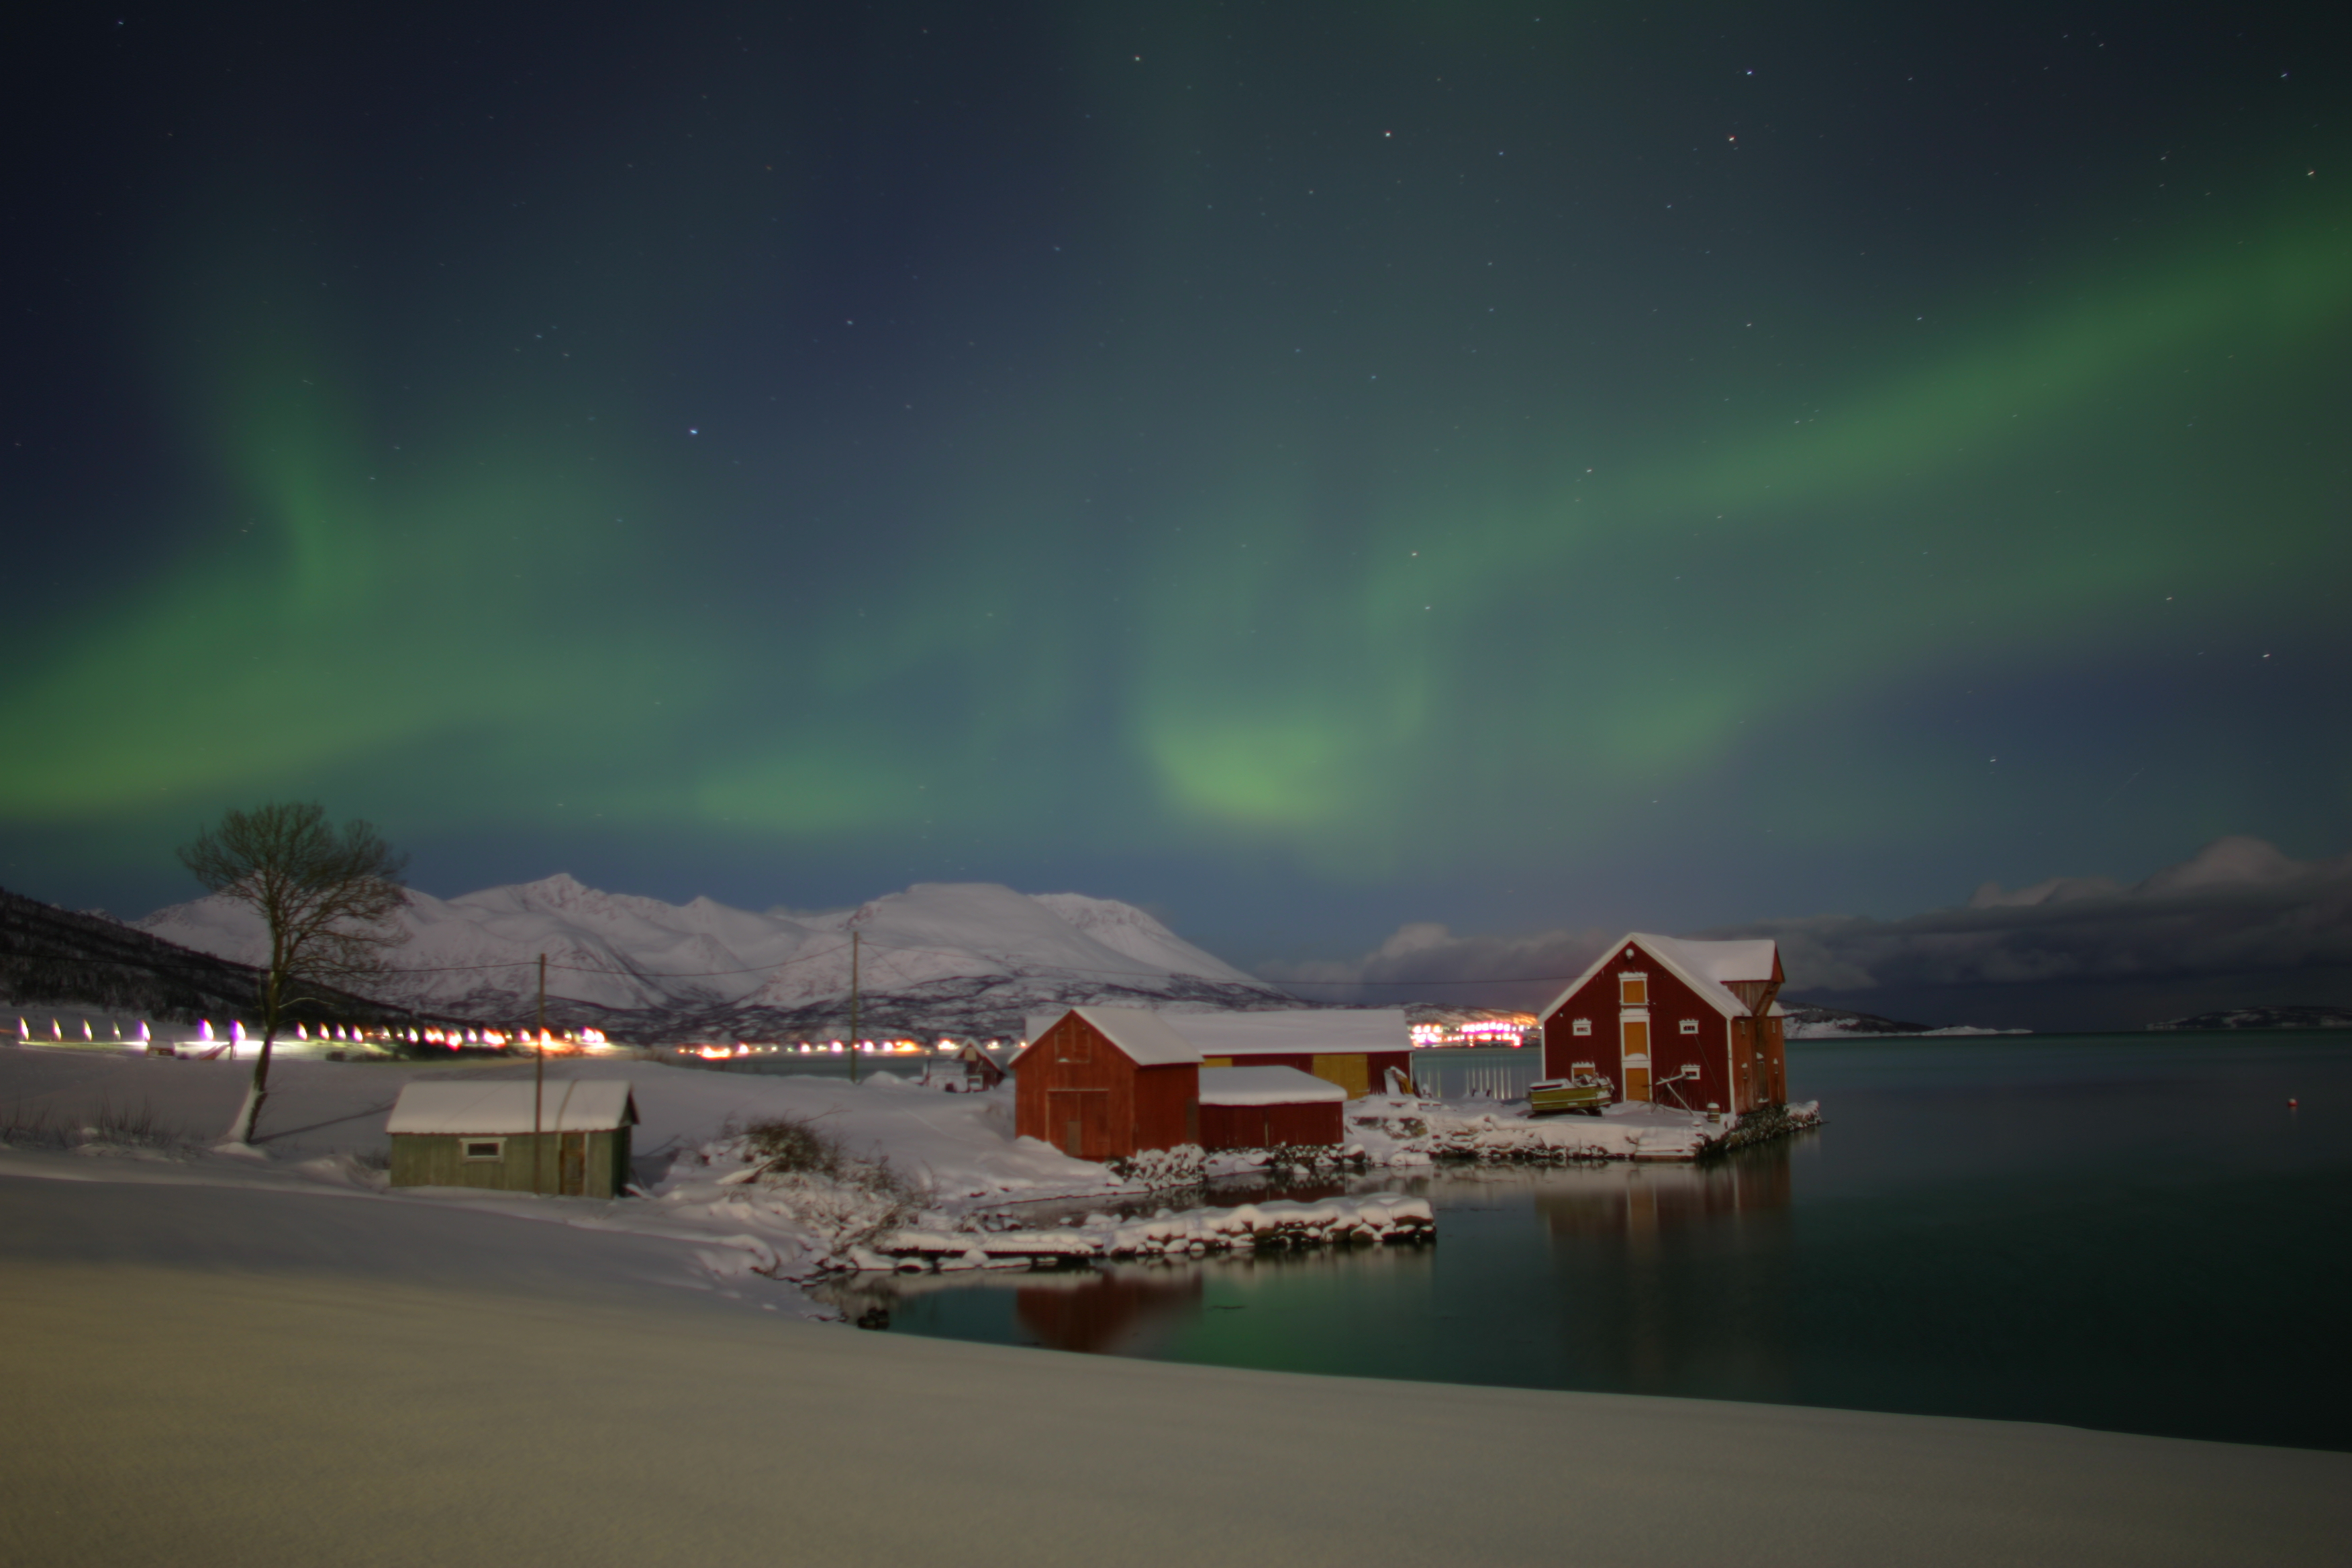 New direct route to Norway to see the Northern Lights